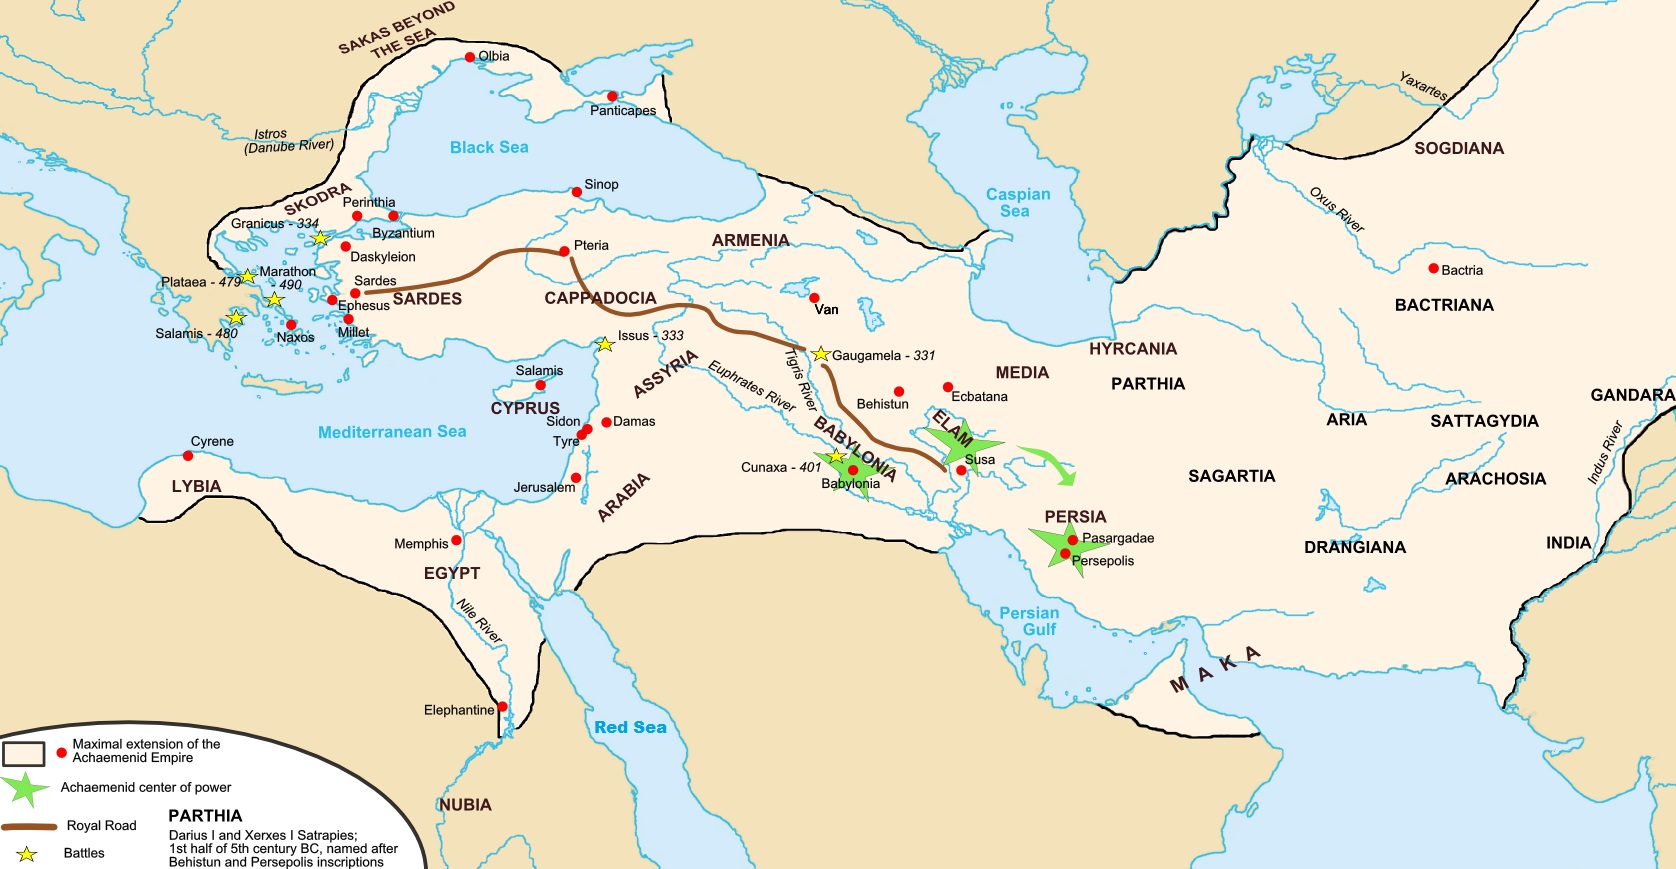 Map of the Achaemenid Empire with the Red Sea (South), Mediterranean Sea (West), and the "Sea in the North".